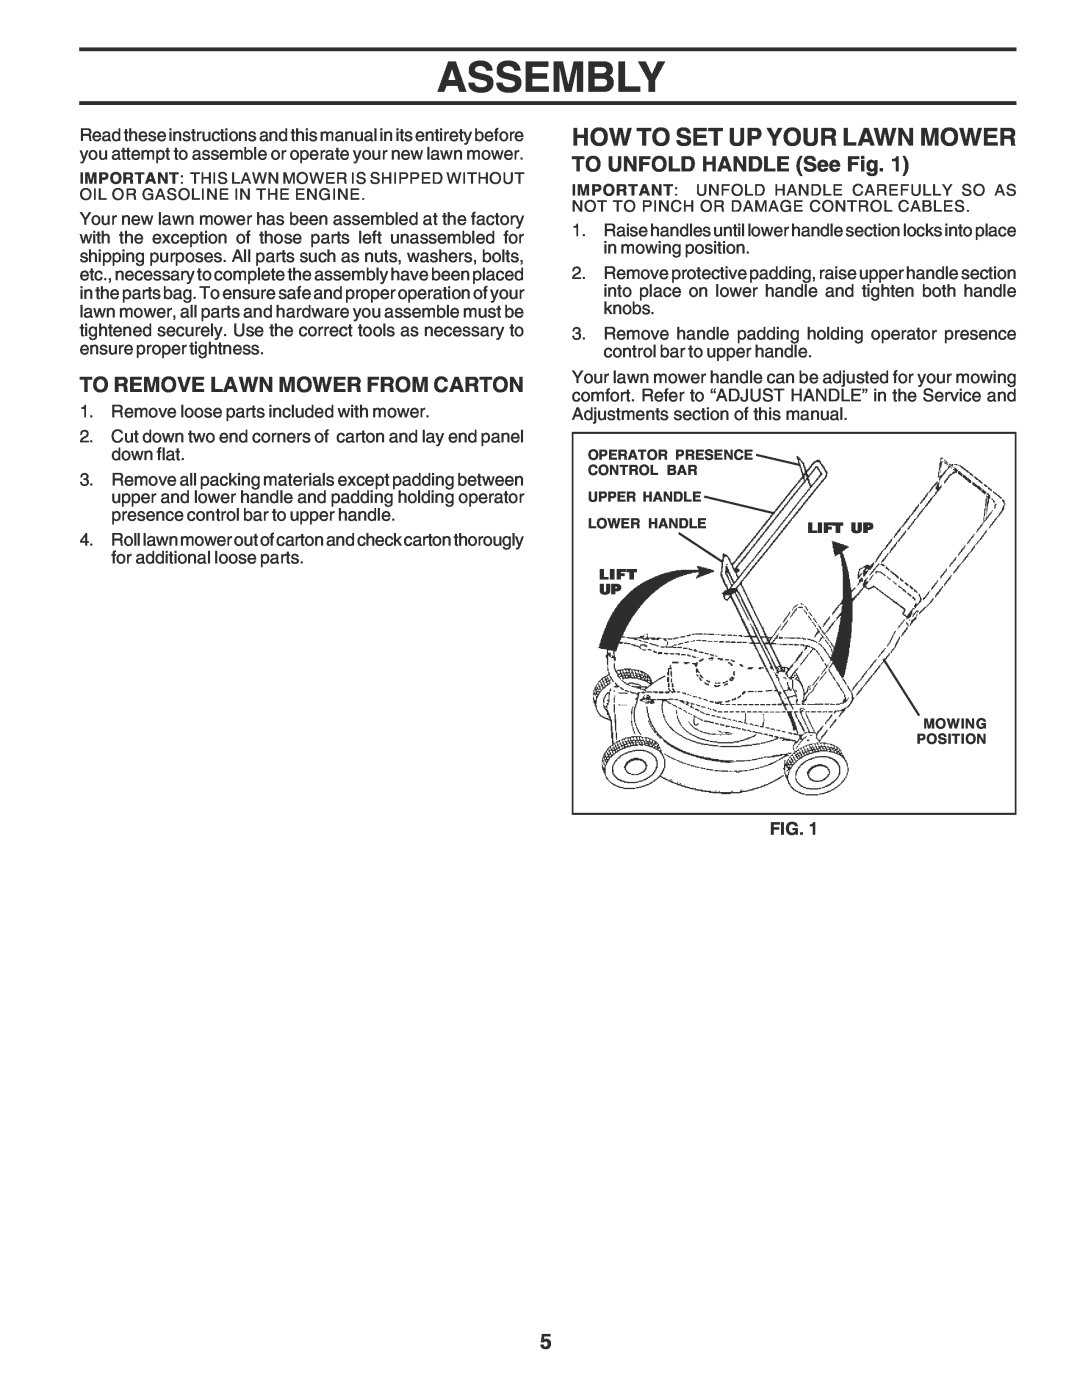 Husqvarna 6022SH Assembly, How To Set Up Your Lawn Mower, To Remove Lawn Mower From Carton, TO UNFOLD HANDLE See Fig 